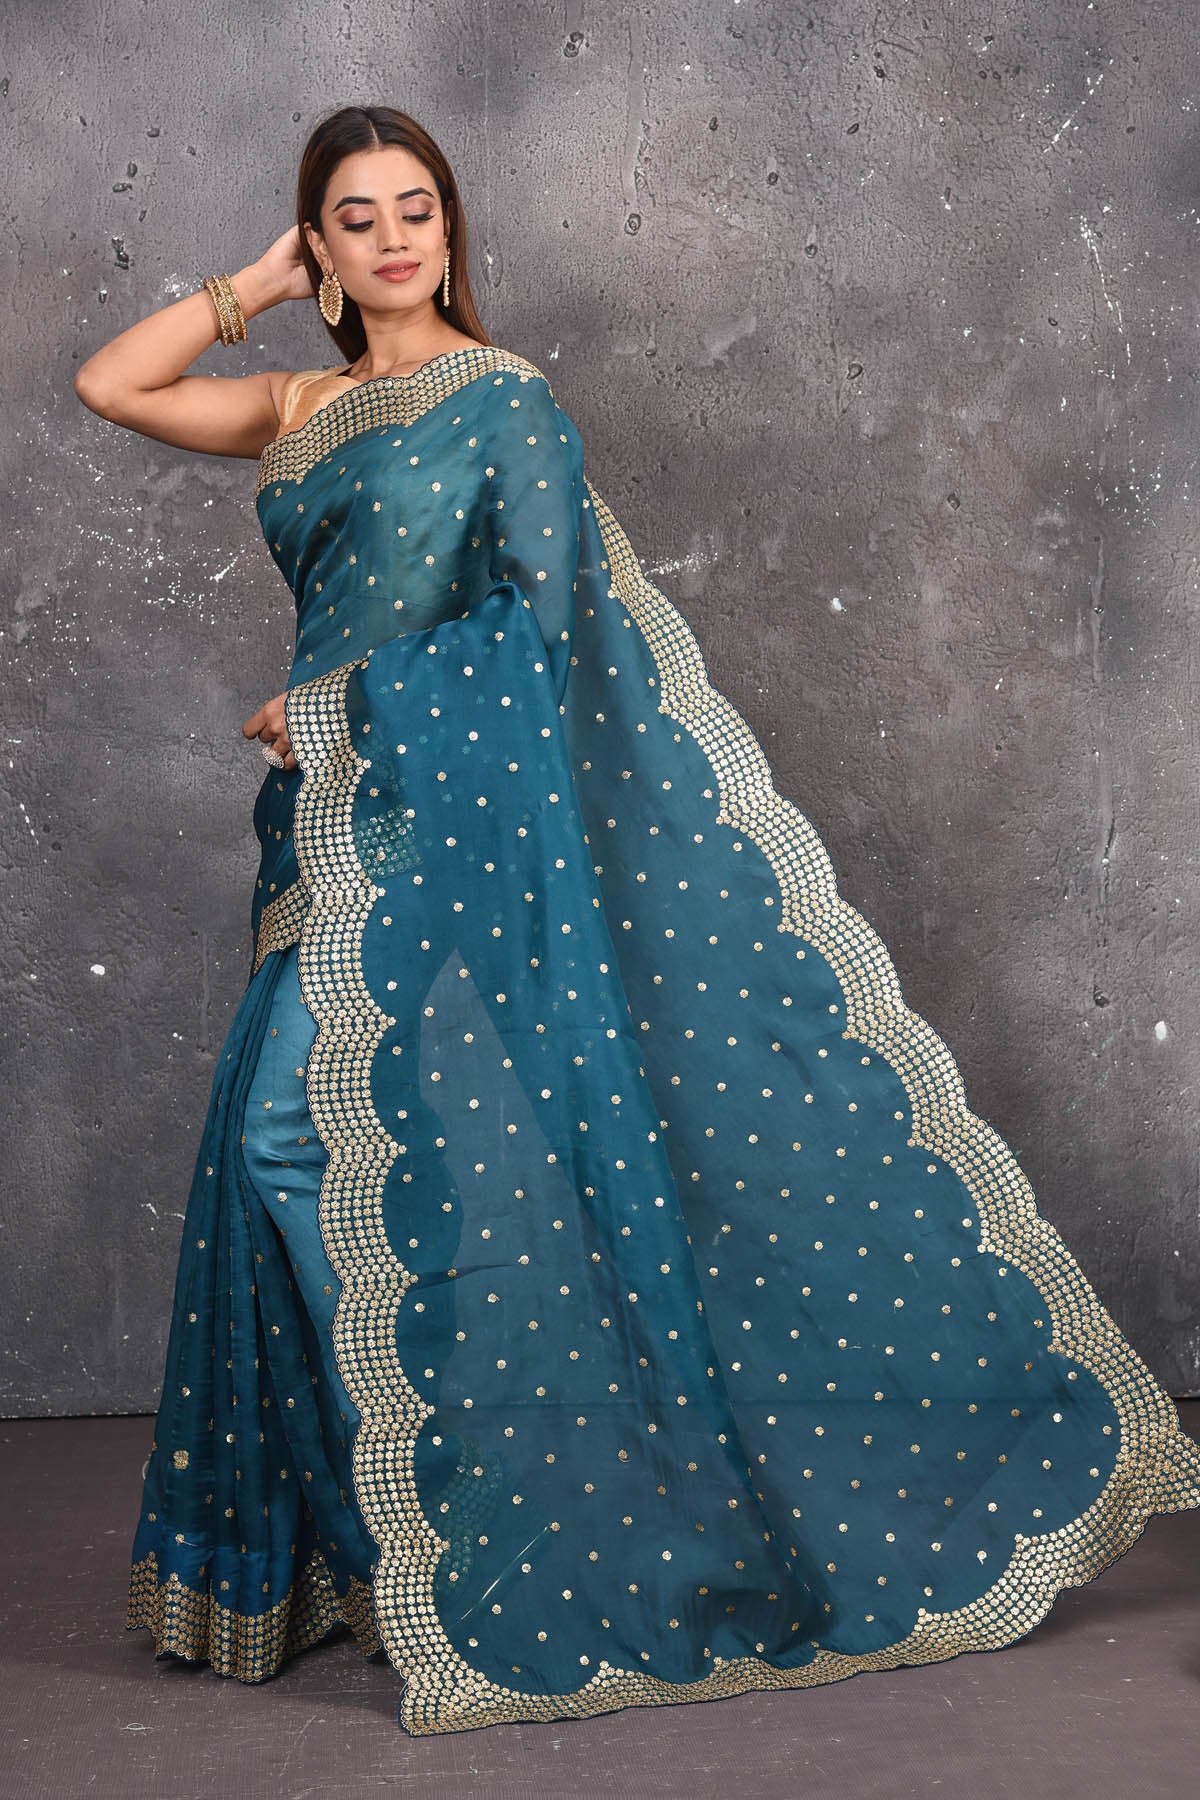 Buy exquisite blue organza saree with golden embroidered online in USA. Pure organza sarees by Pure Elegance in blue color. It has a beautiful gold embroidered border. This organza brings the charm and simplicity of this saree with border and pallu with the delegate embroidery work on border. Shop this designer silk sari from Pure Elegance Indian fashion store in USA.-Full view with open pallu.